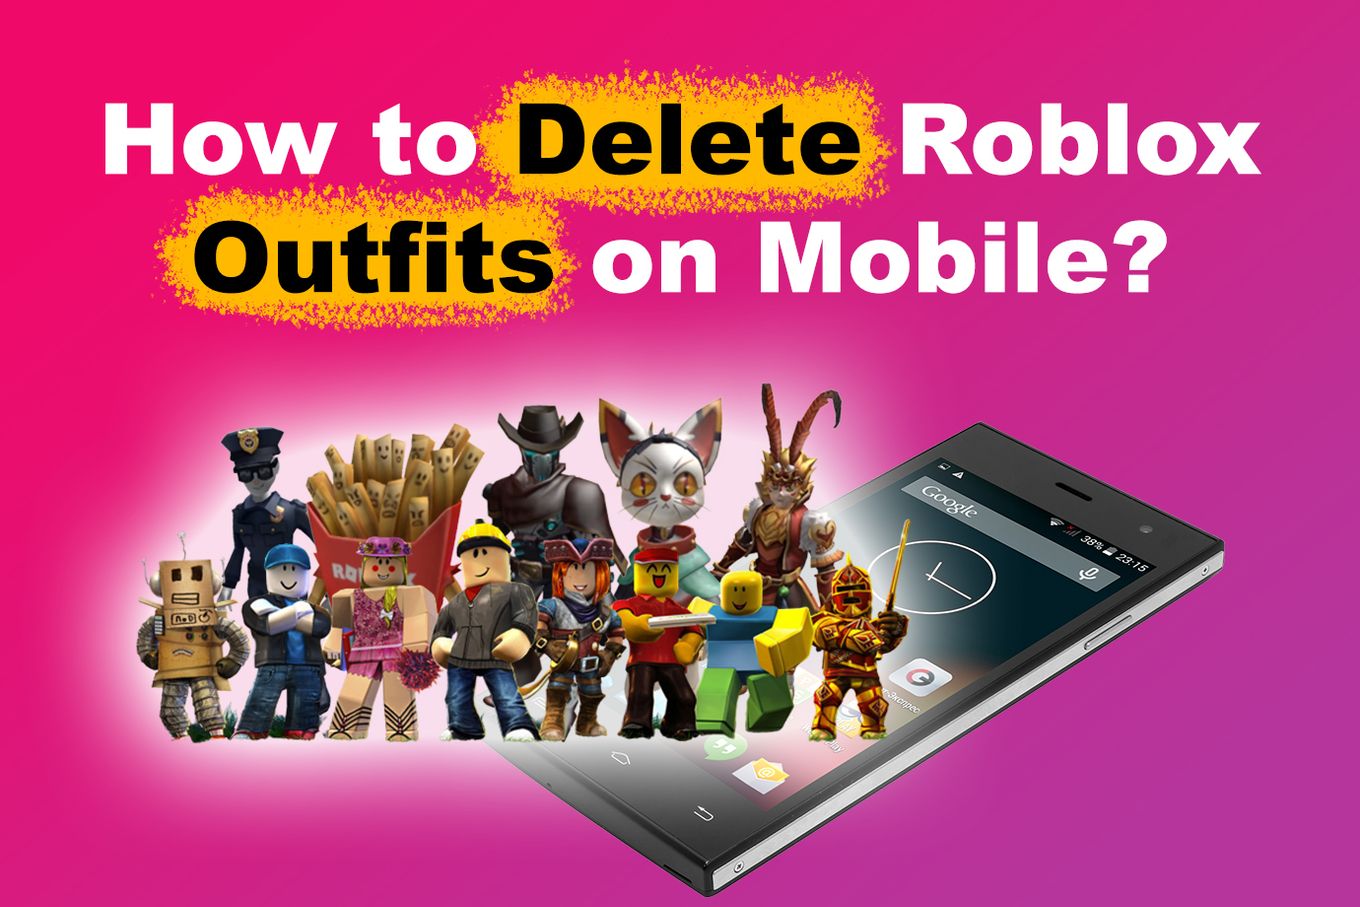 How to Delete Roblox Outfits on Mobile